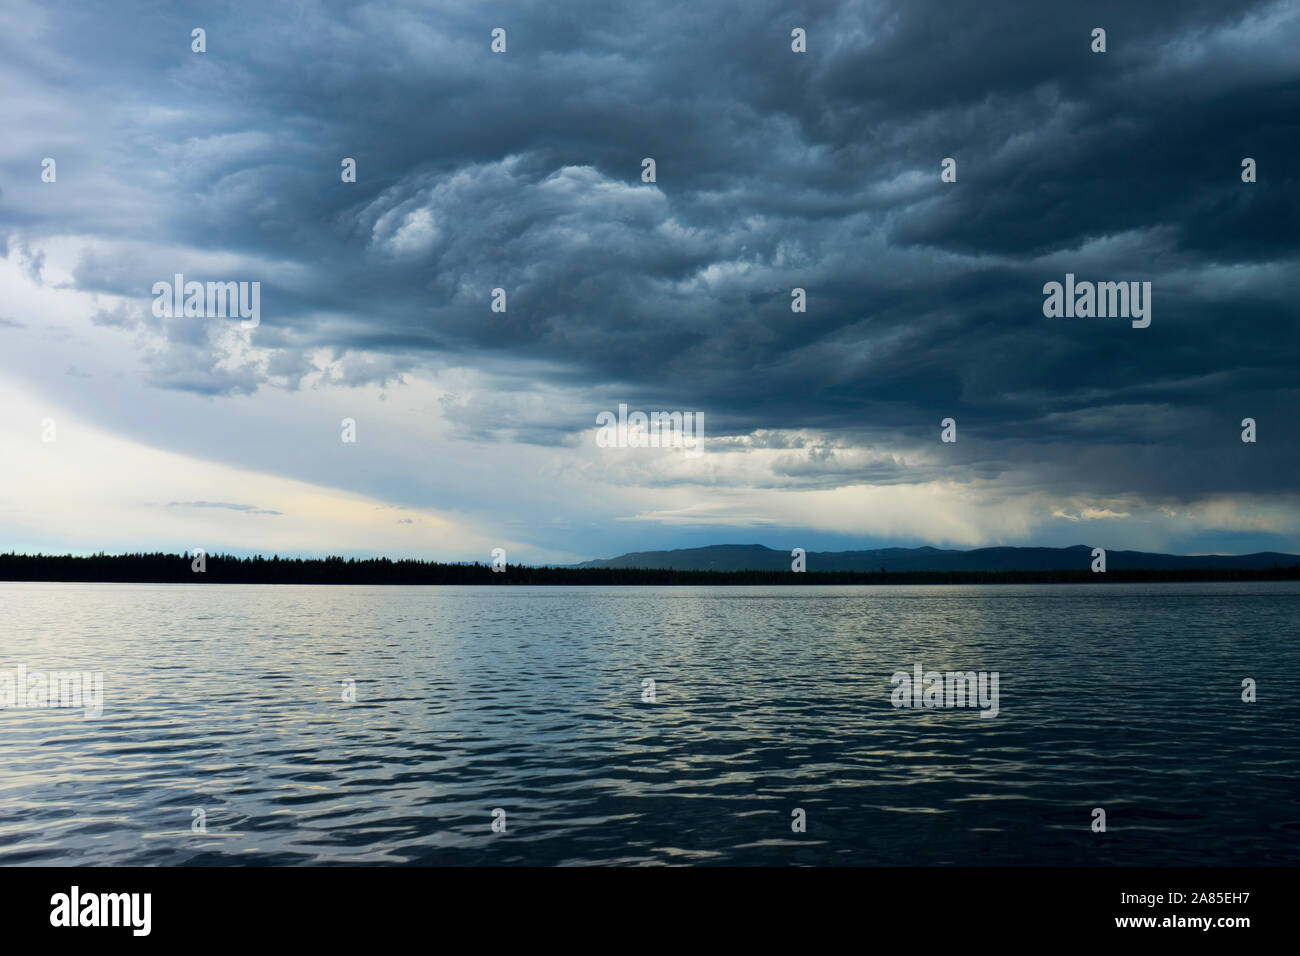 Ominous dark sky of storm clouds over Jenny Lake Stock Photo